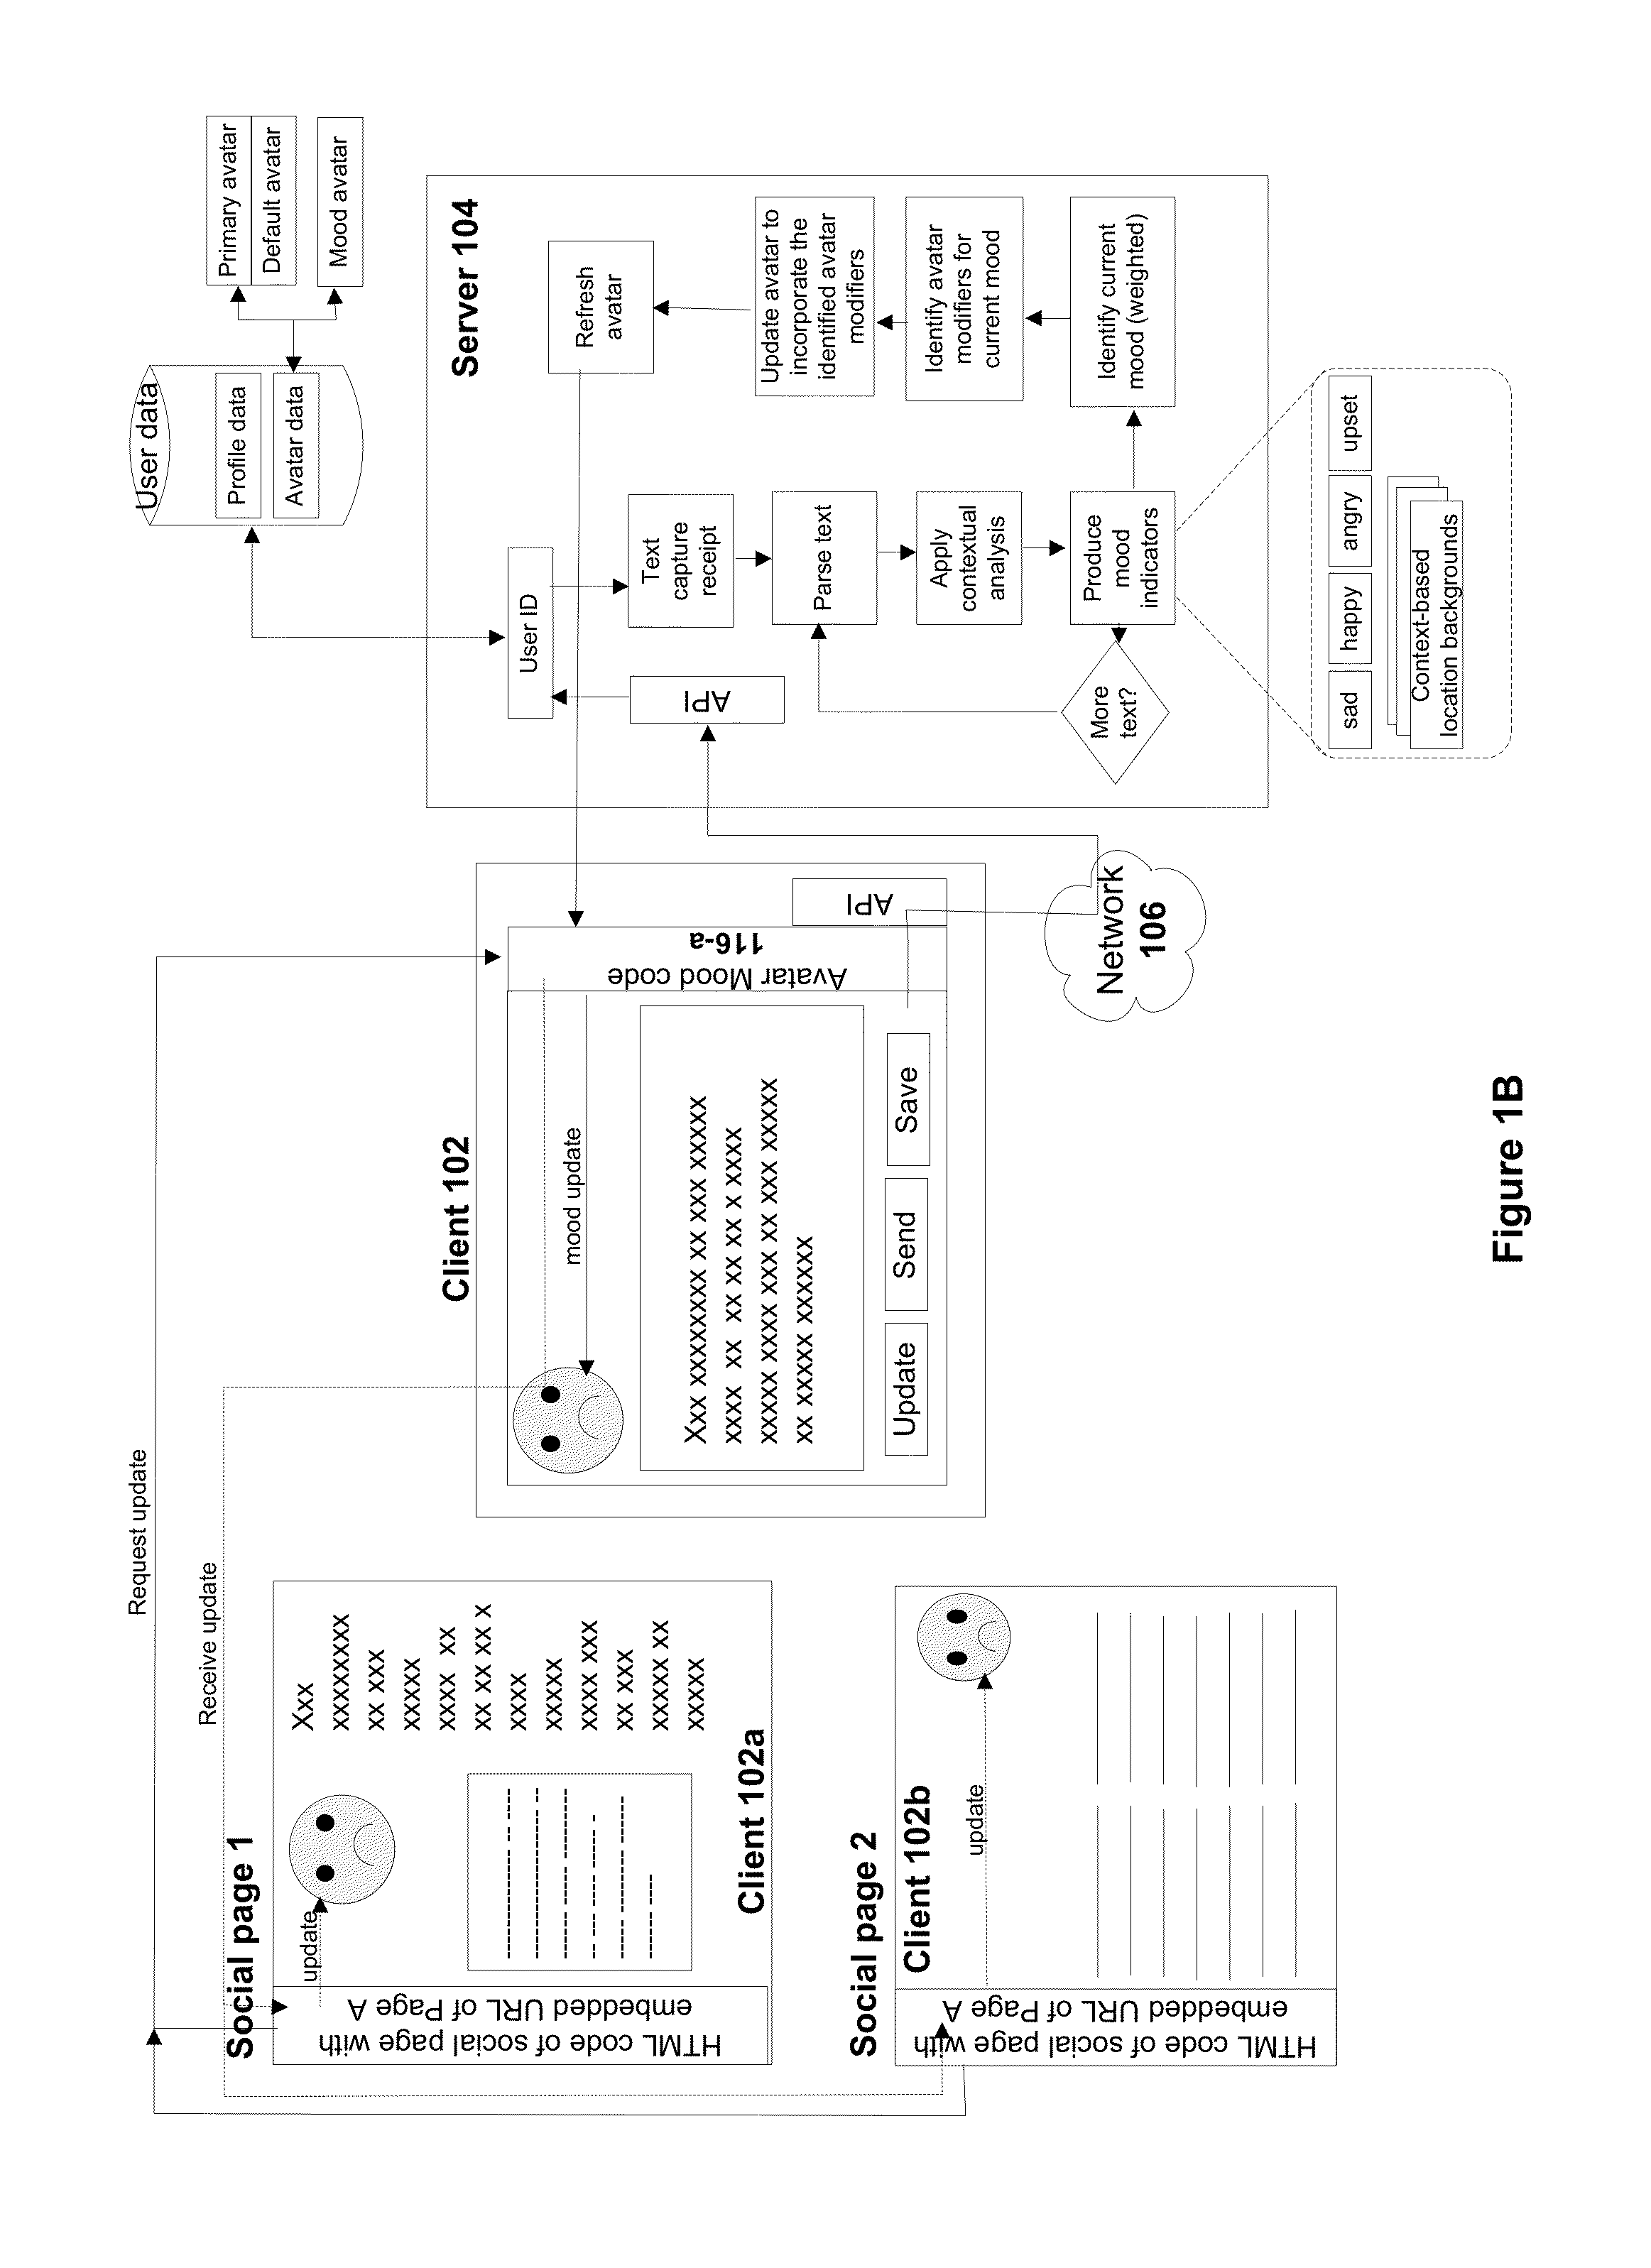 System and Method for Generating Contextual User-Profile Images